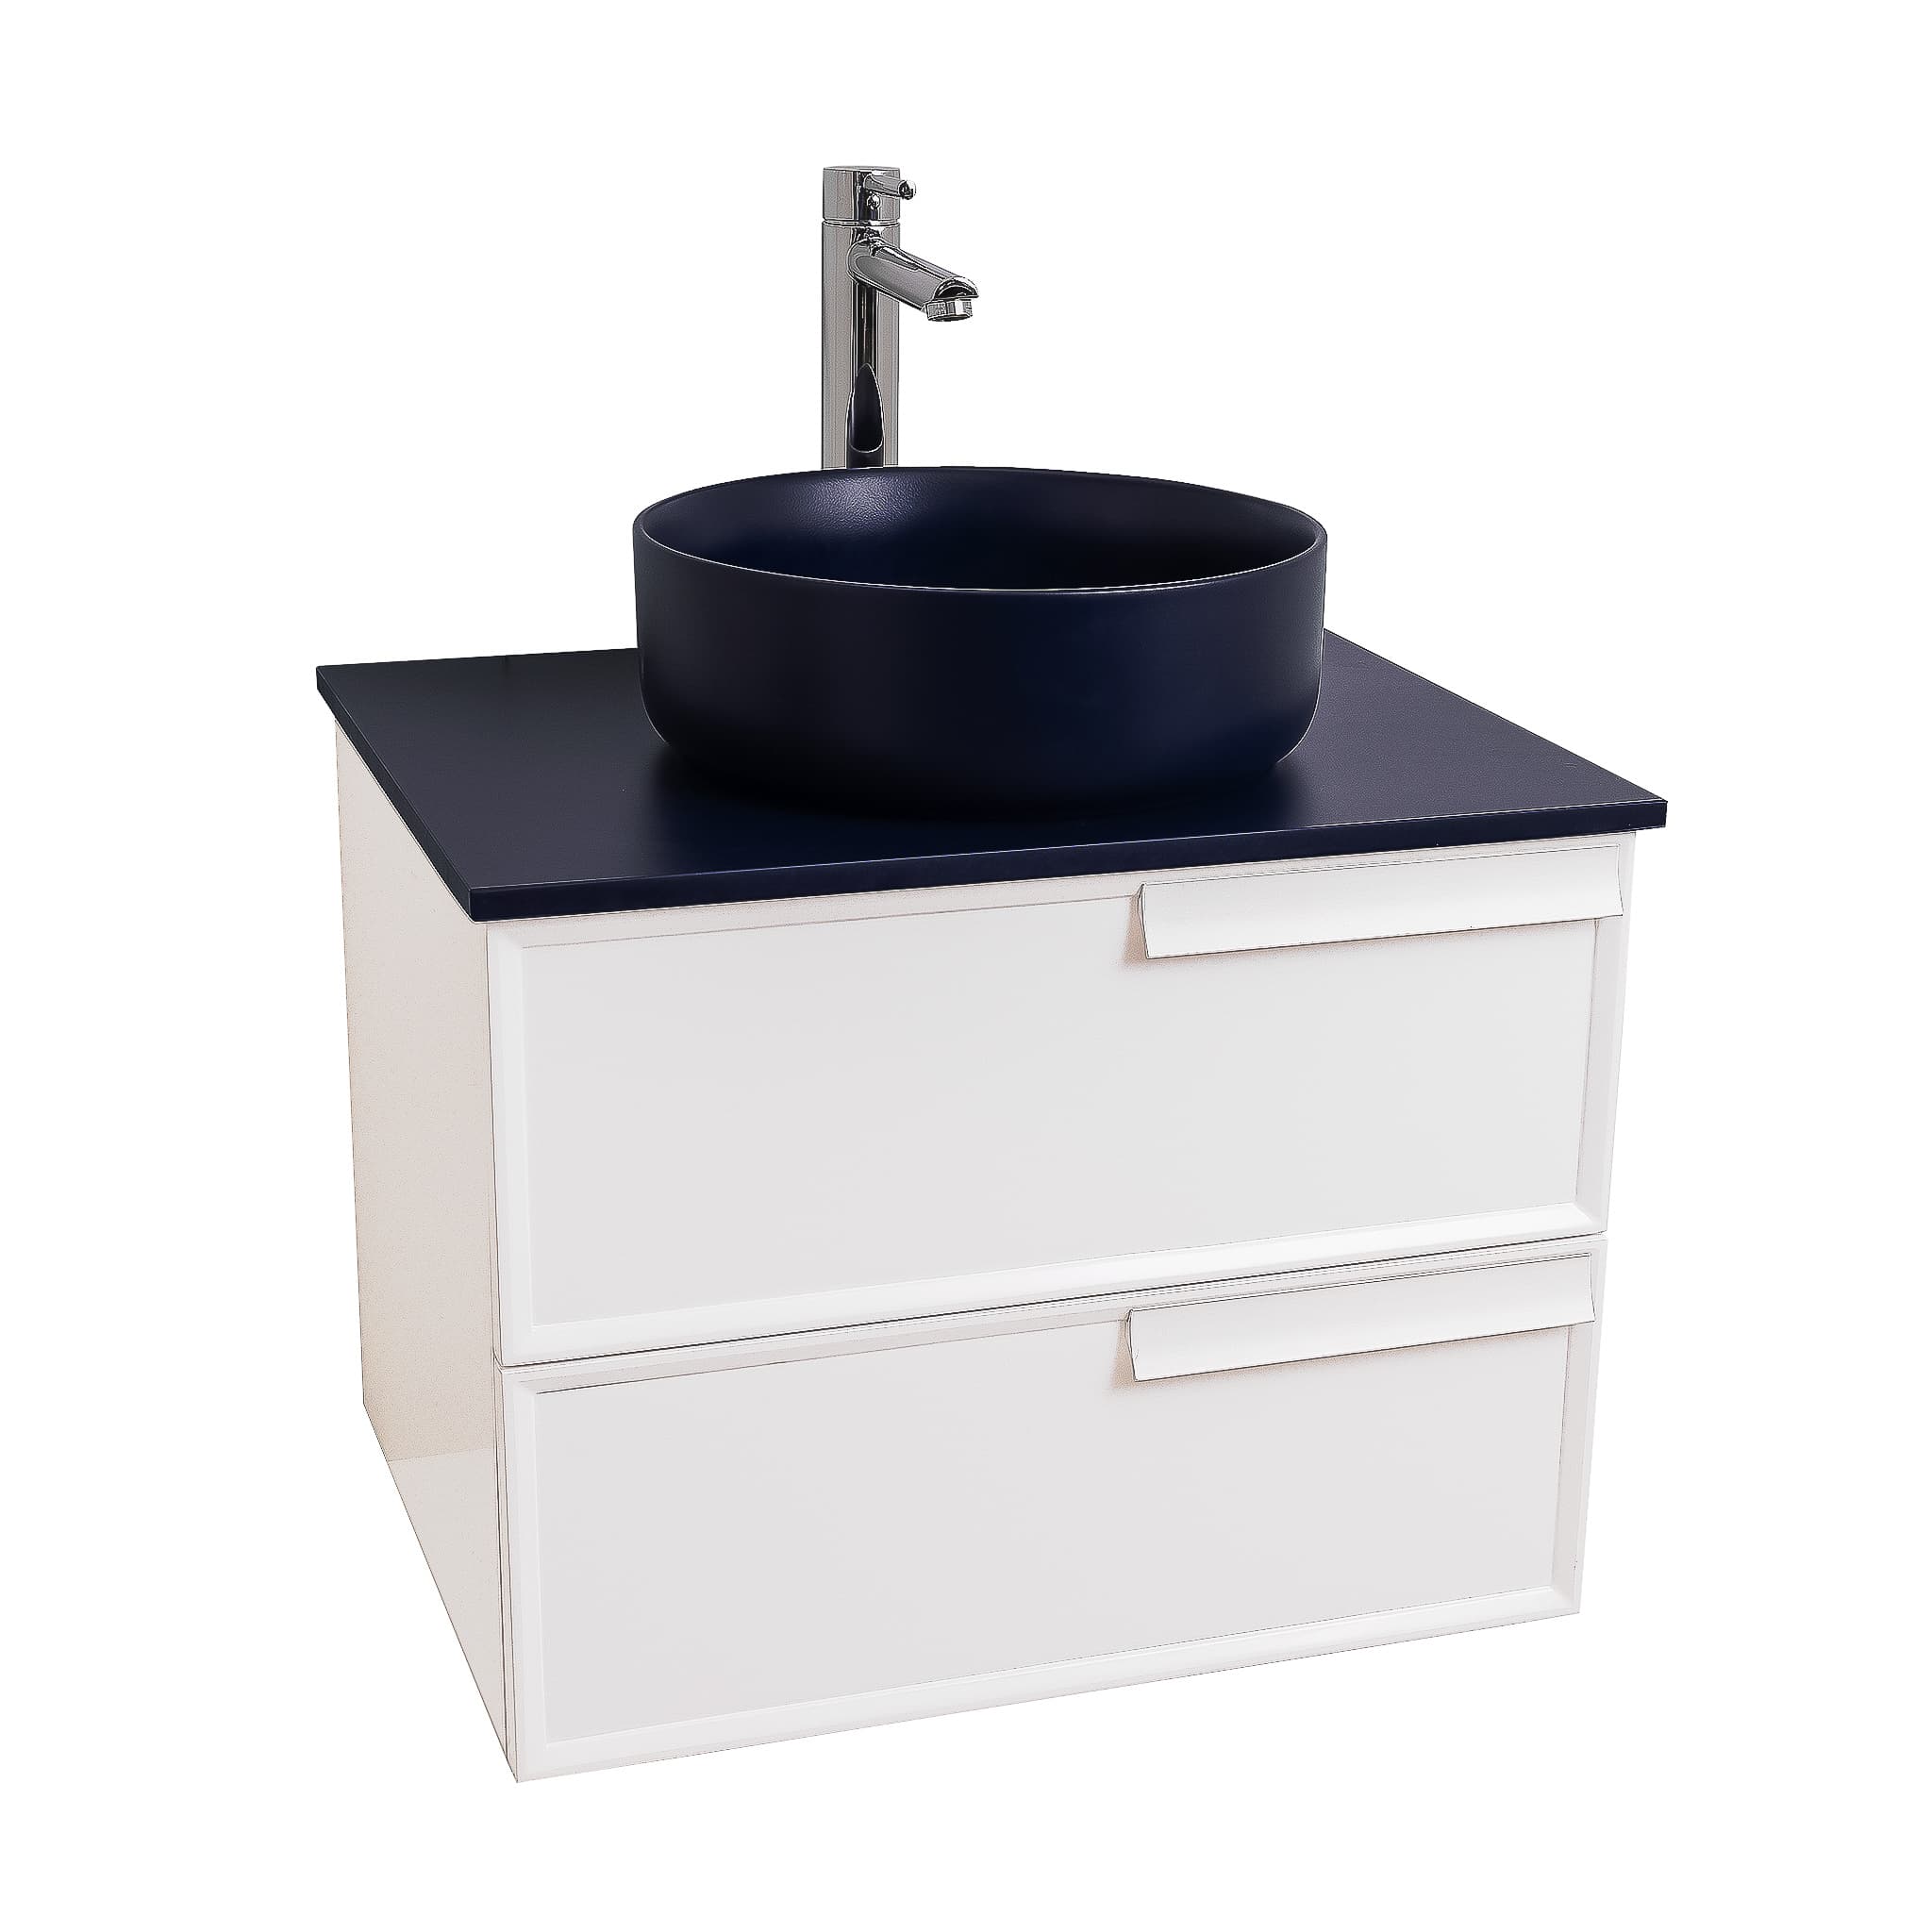 Garda 23.5 Matte White Cabinet, Ares Navy Blue Top and Ares Navy Blue Ceramic Basin, Wall Mounted Modern Vanity Set